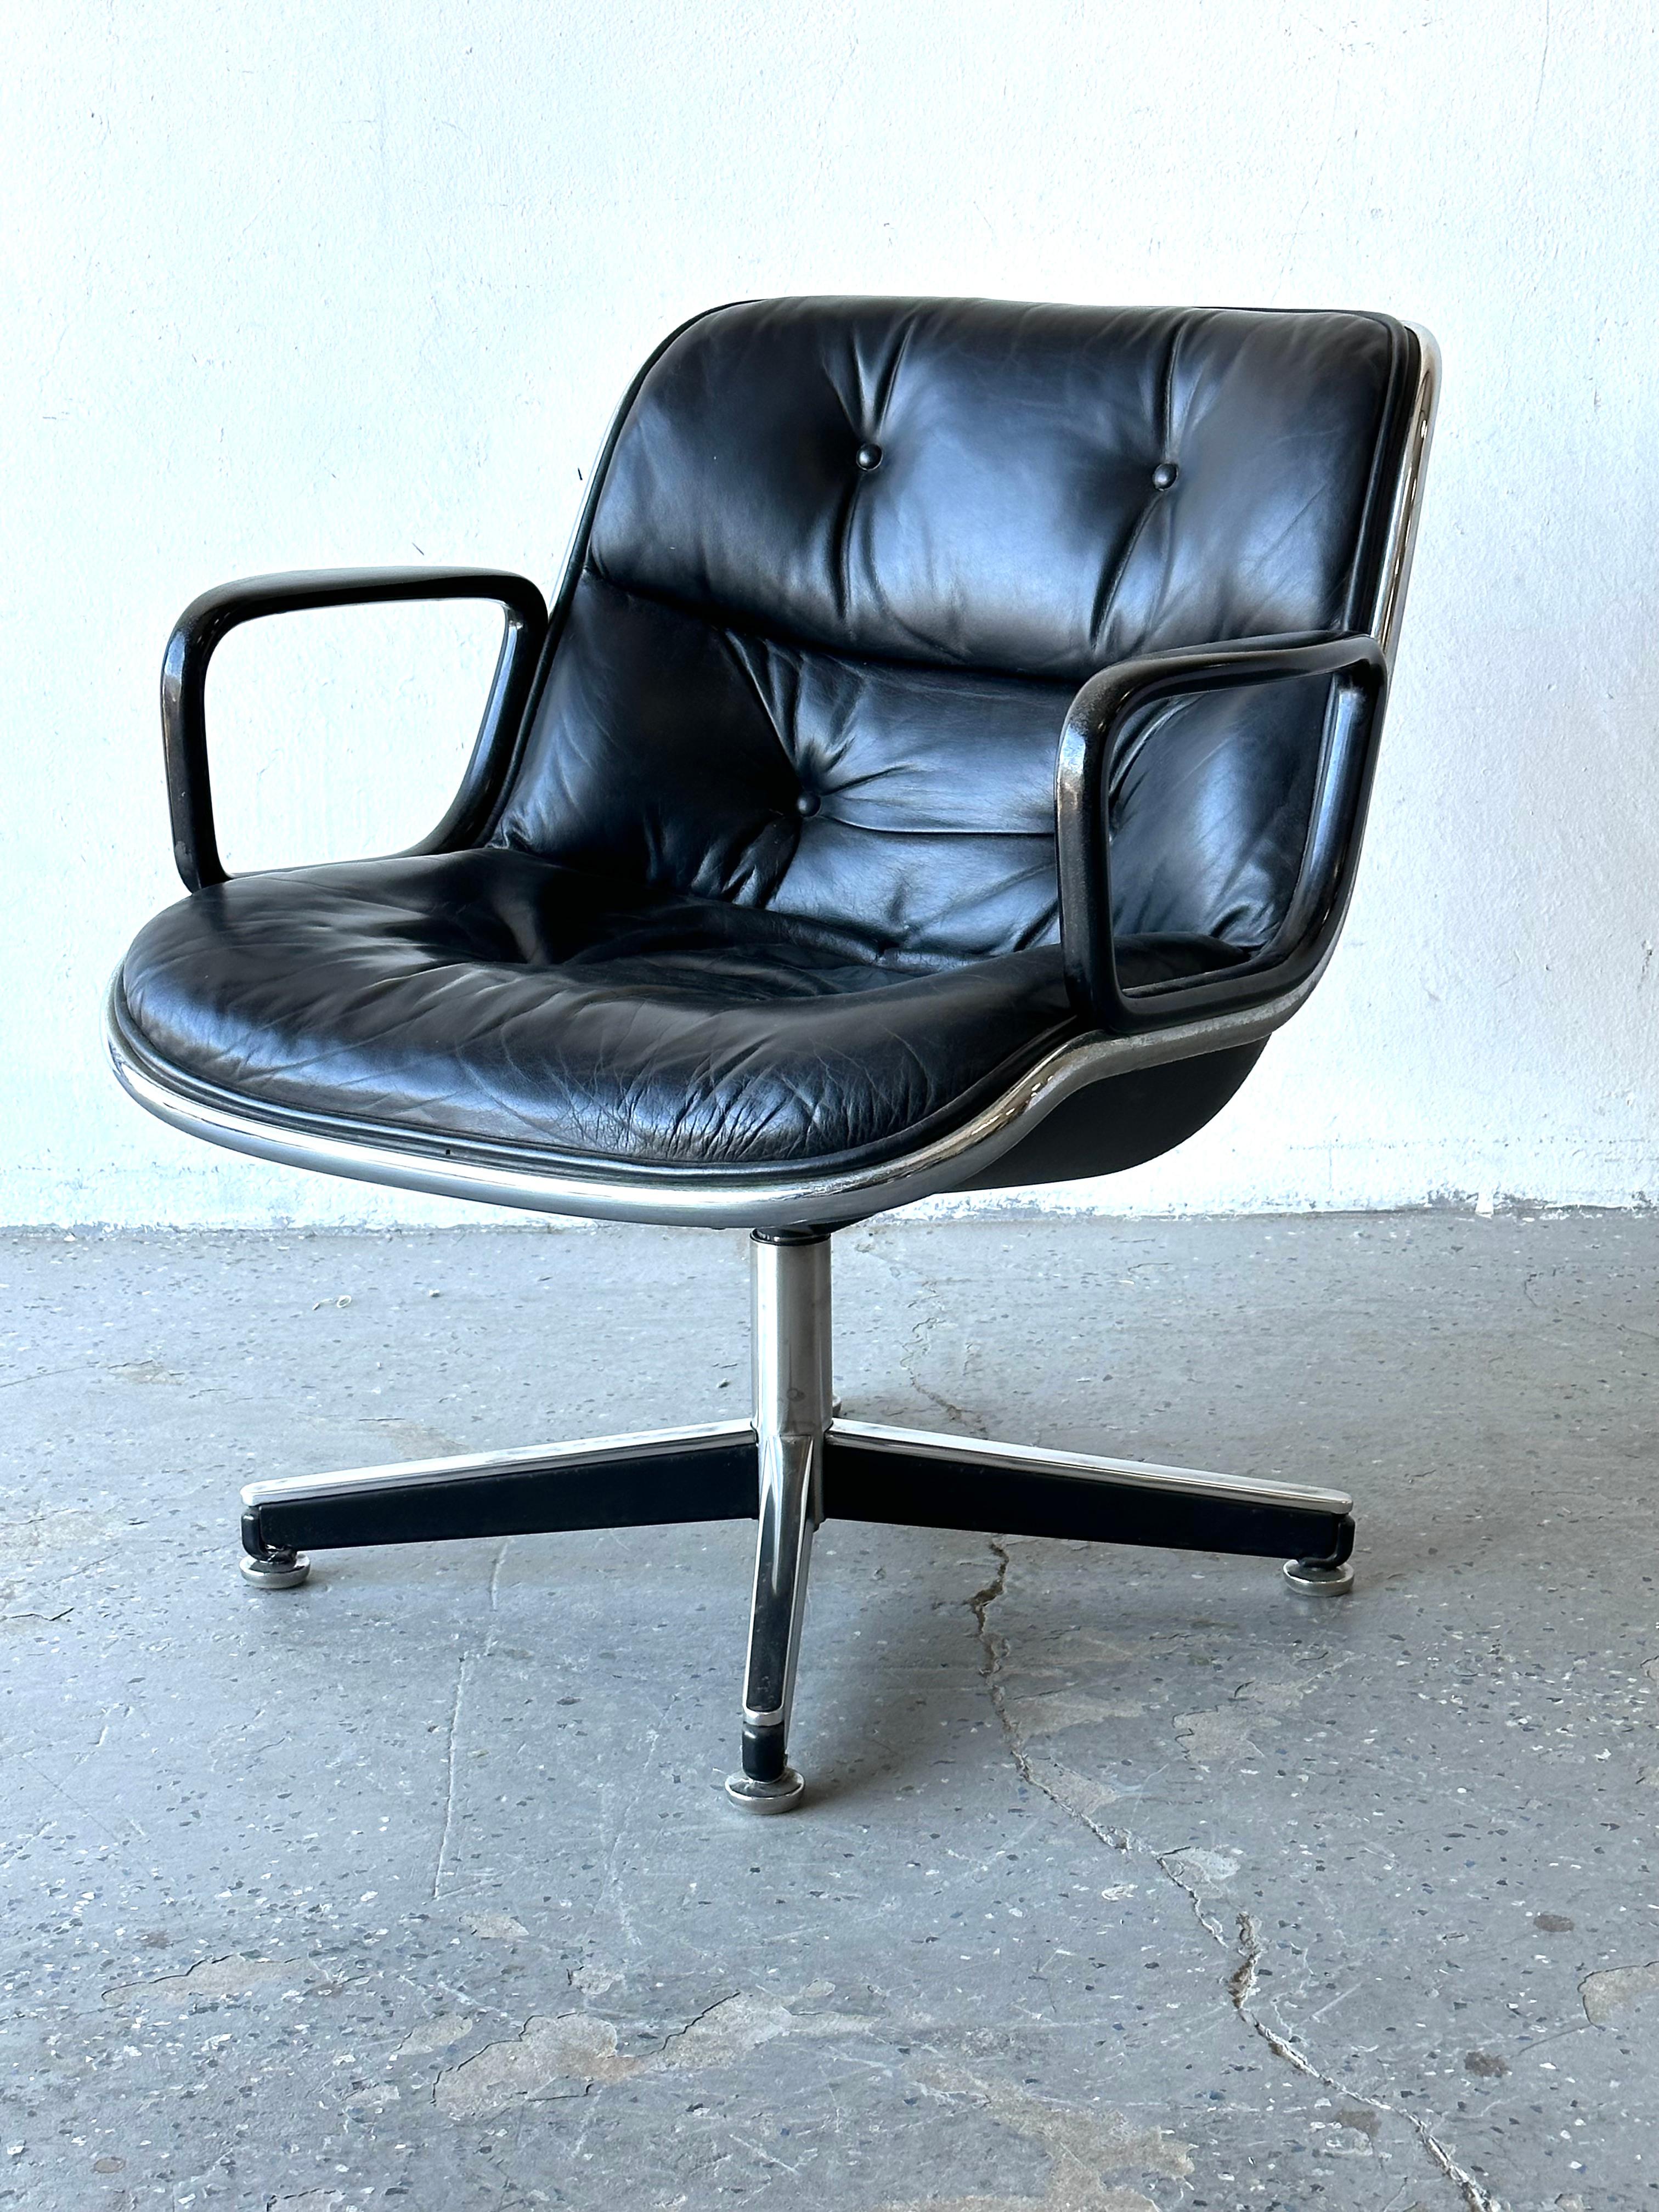 Offering the classic Pollock Executive Chair in its original black leather, black steel frame, and vintage 4-star base, chair reclines. Chair was made in1972.

Dimensions

Arm to arm 26 inches wide front to back 26 inches deep Floor top of back